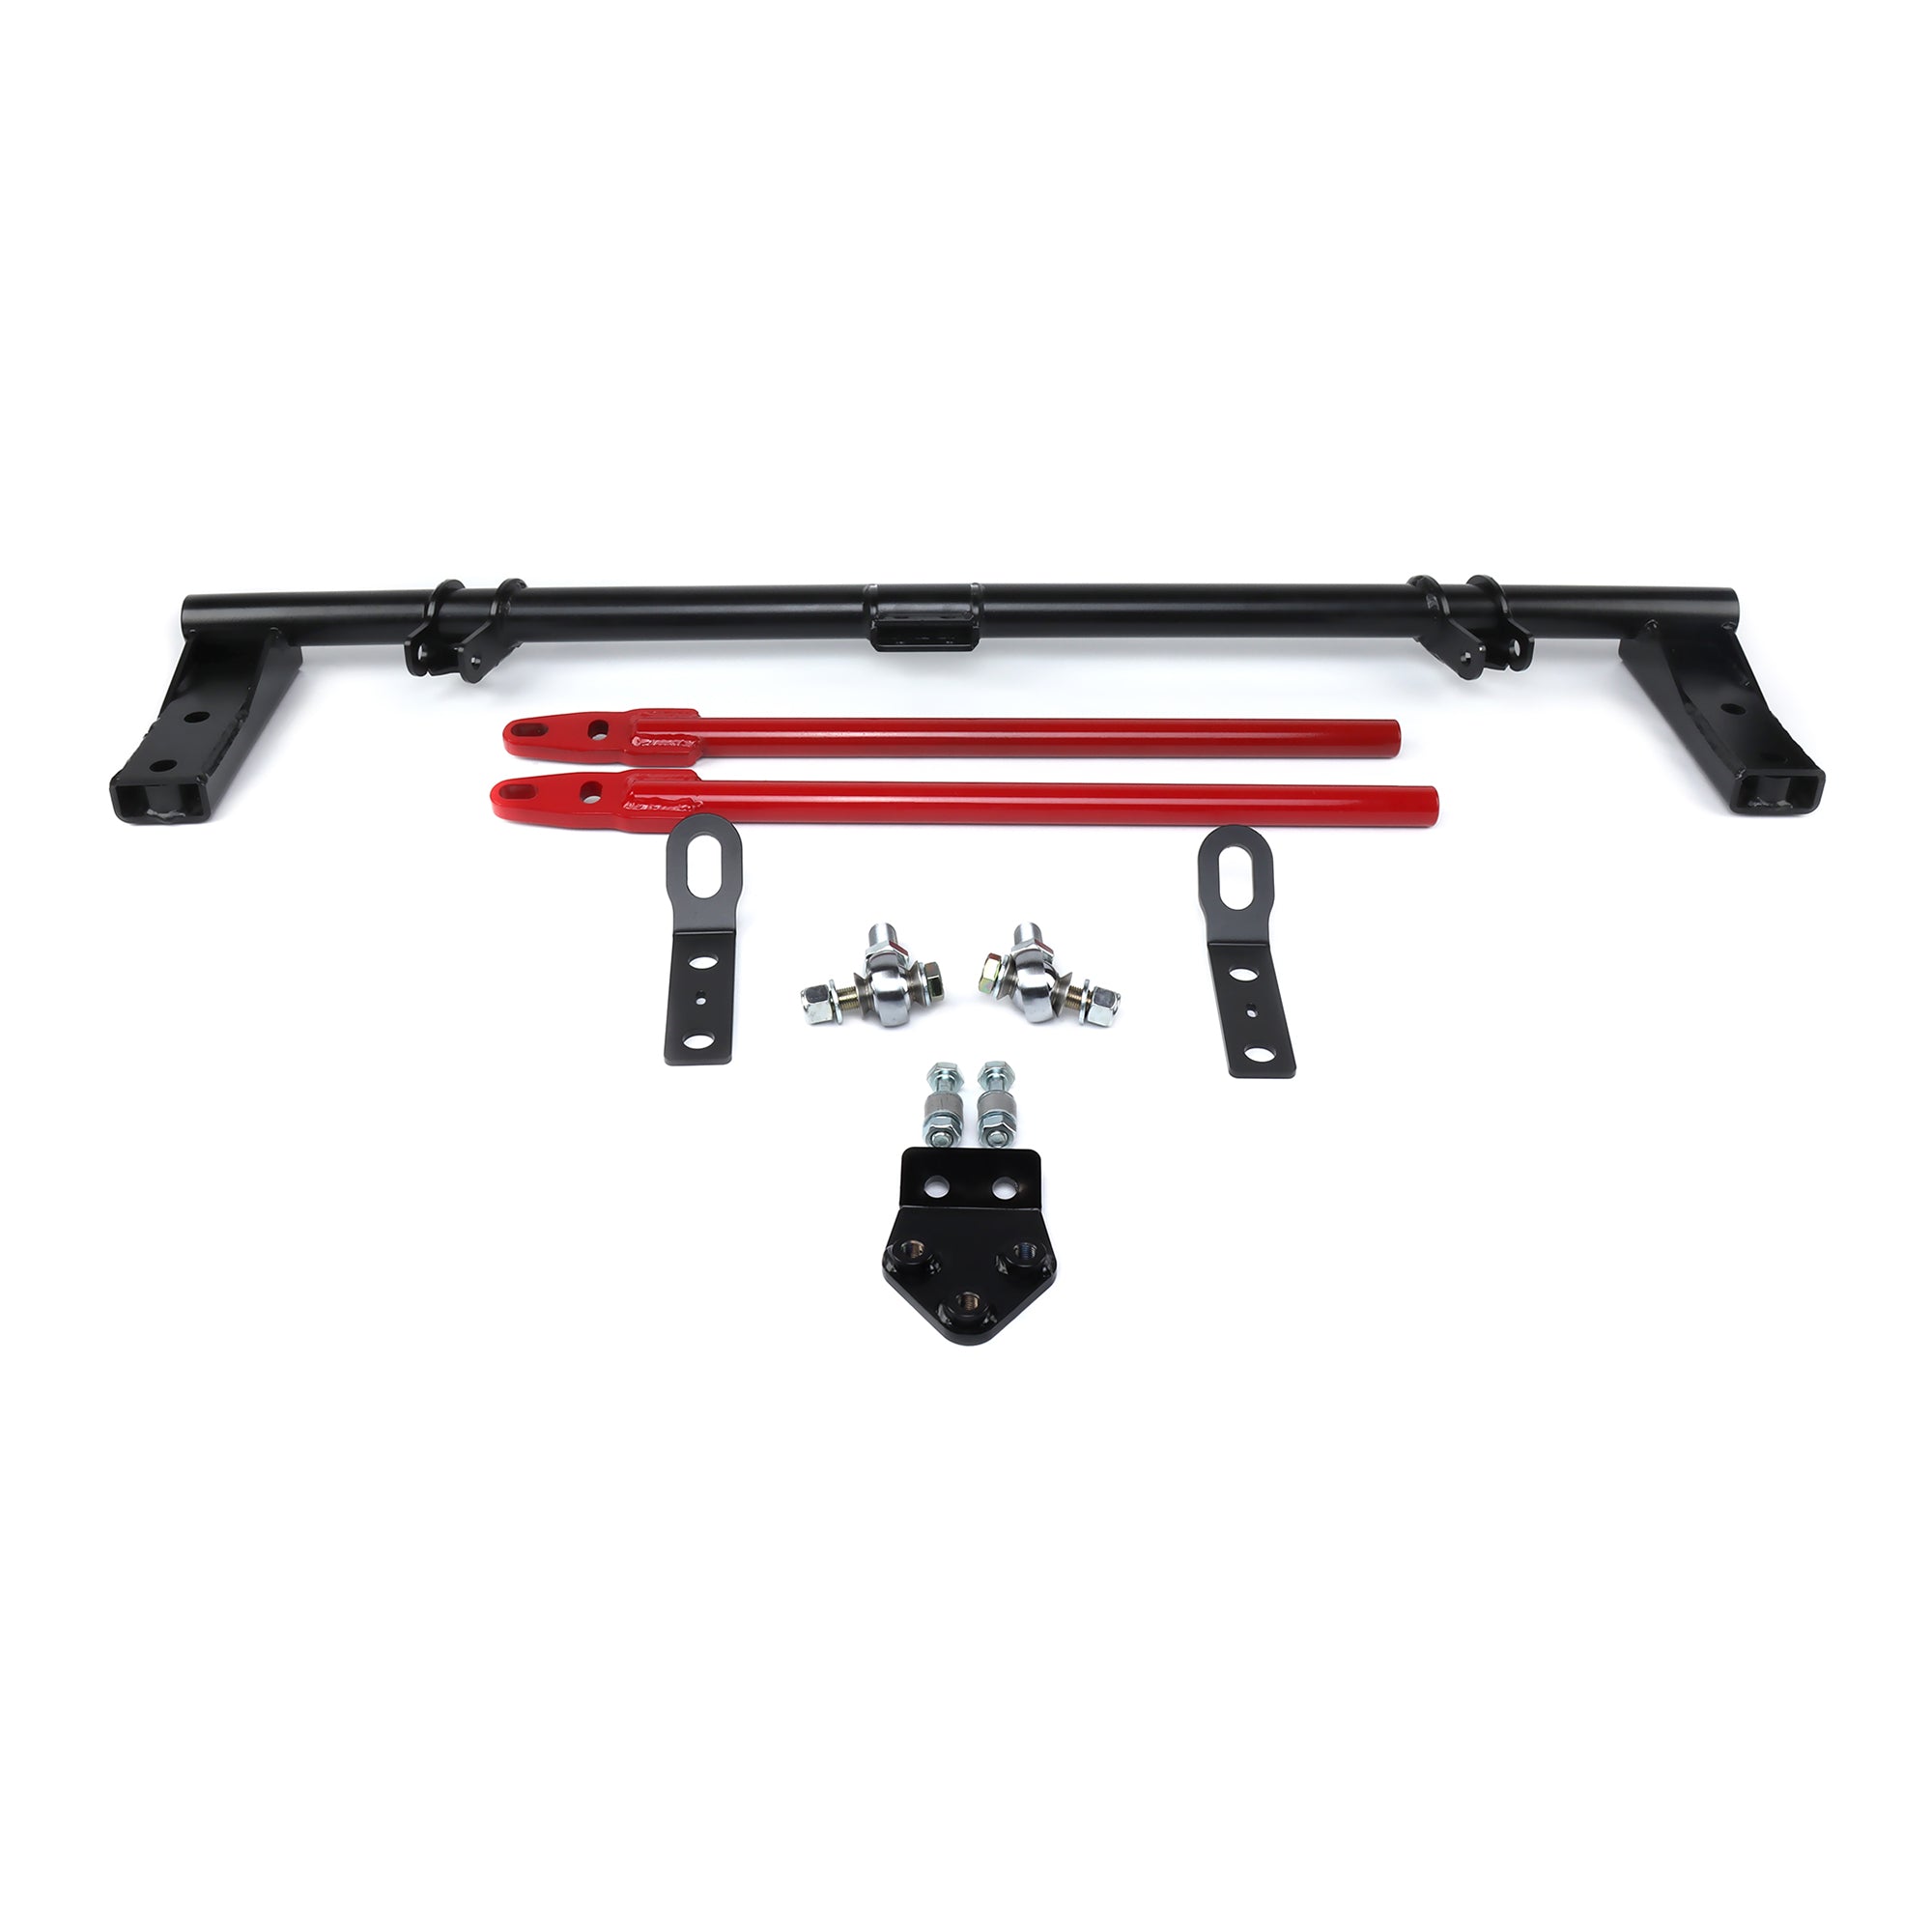 Innovative Mounts 90-93 Accord Competition/Traction Bar Kit INO-59310